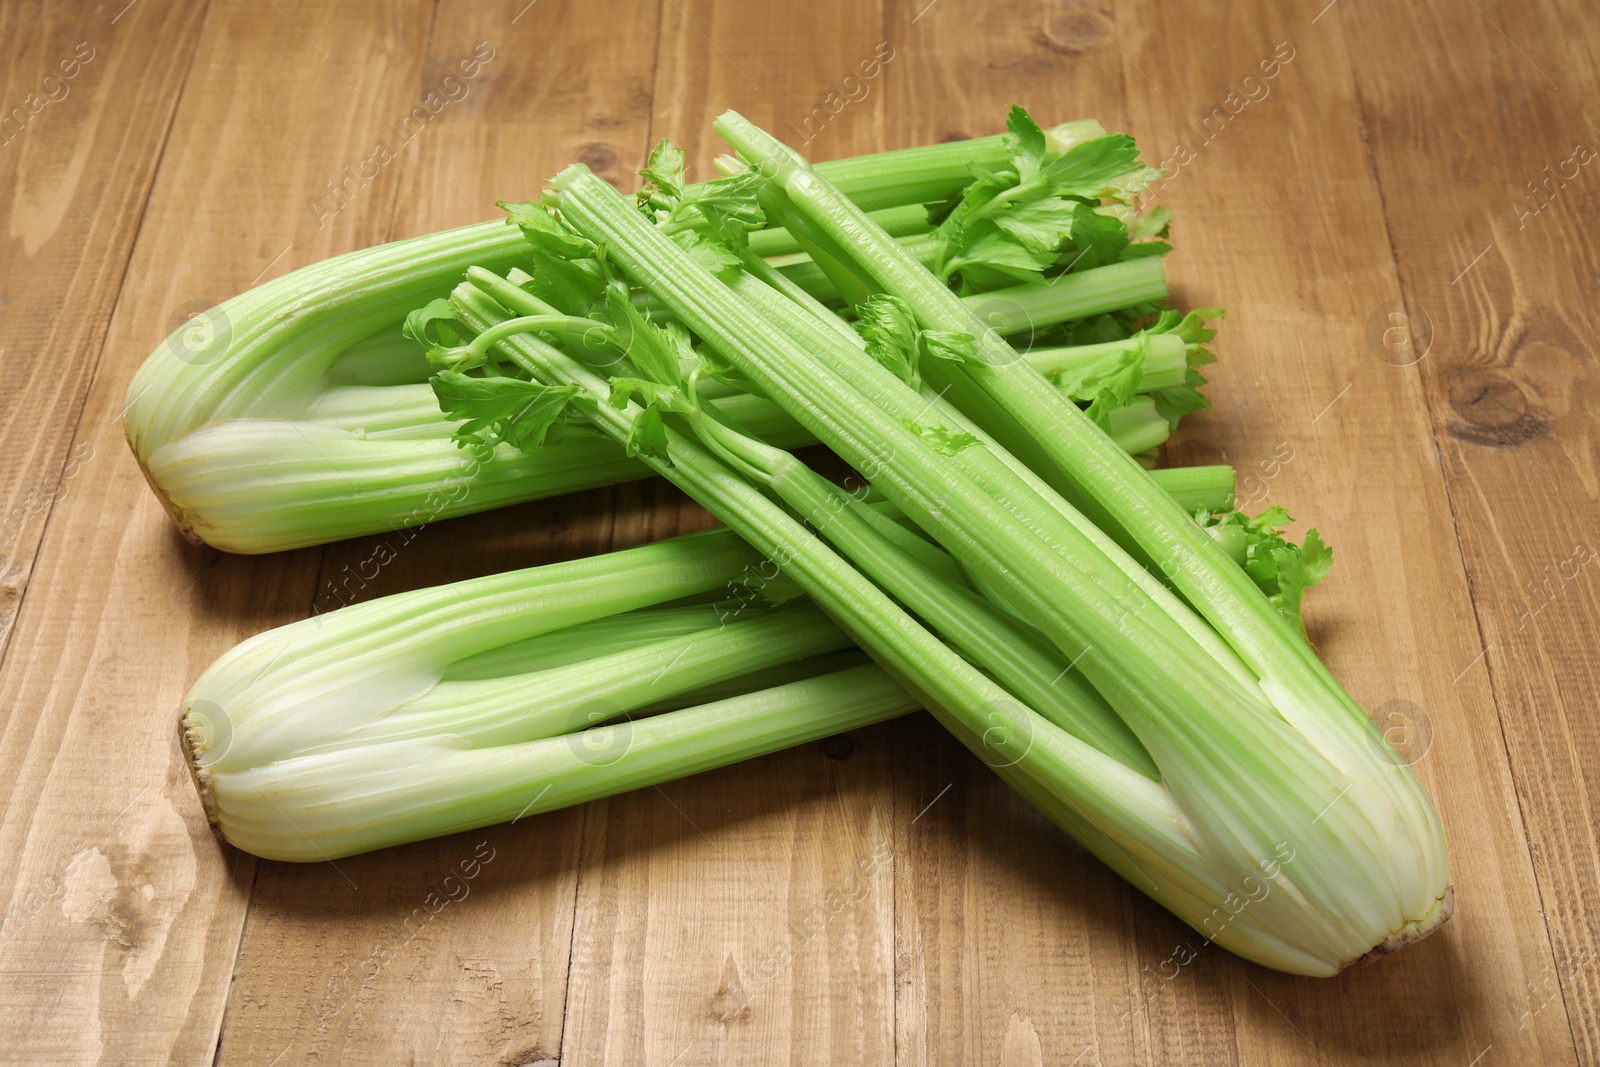 Photo of Bunches of fresh green celery on wooden table